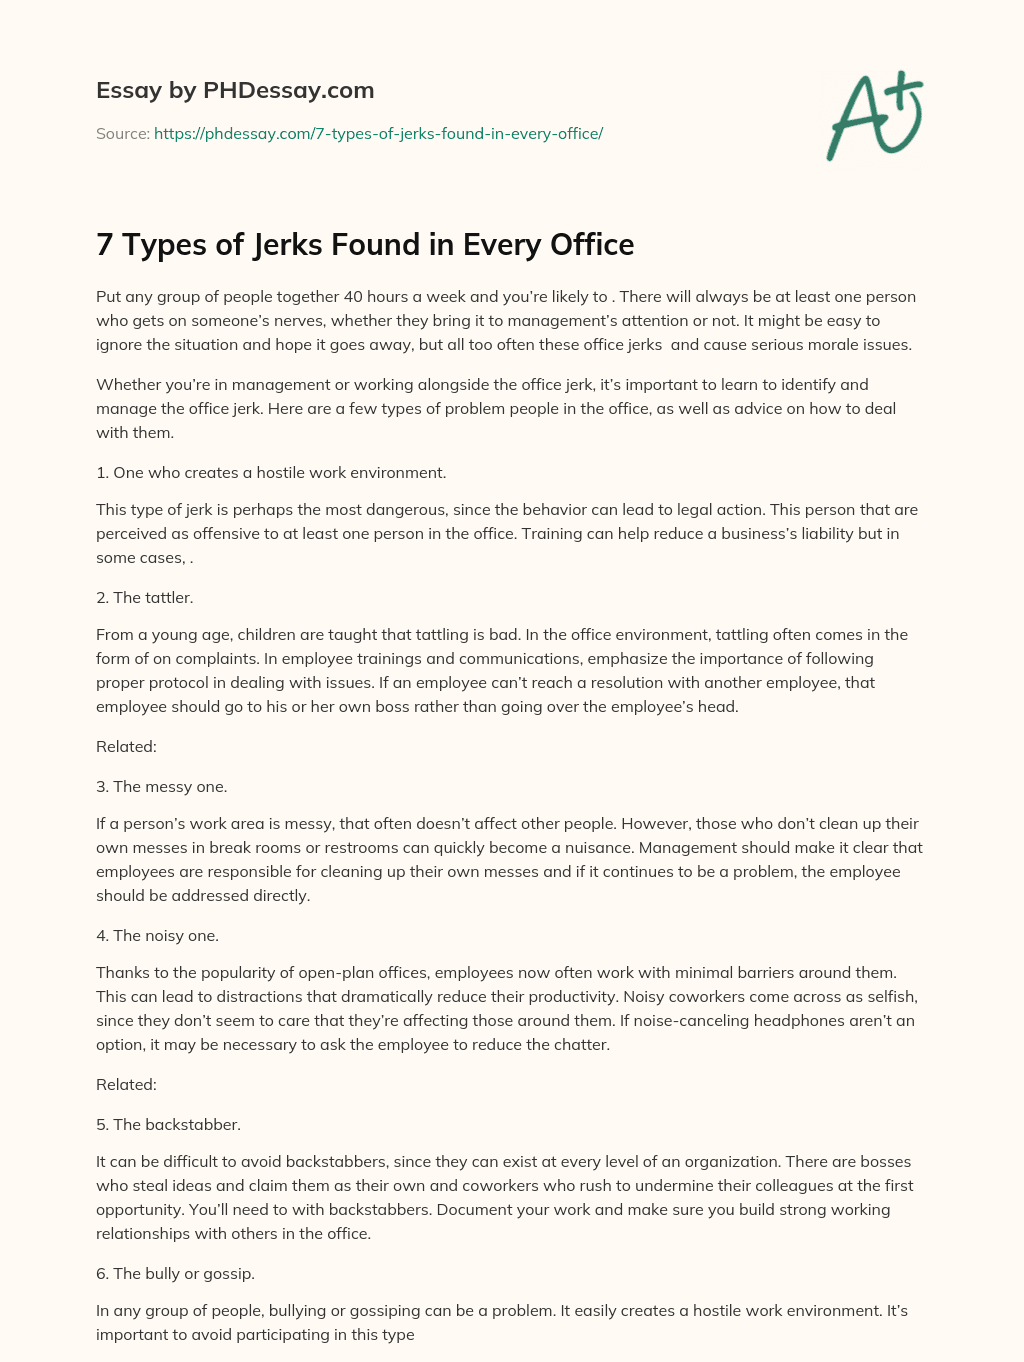 7 Types of Jerks Found in Every Office essay